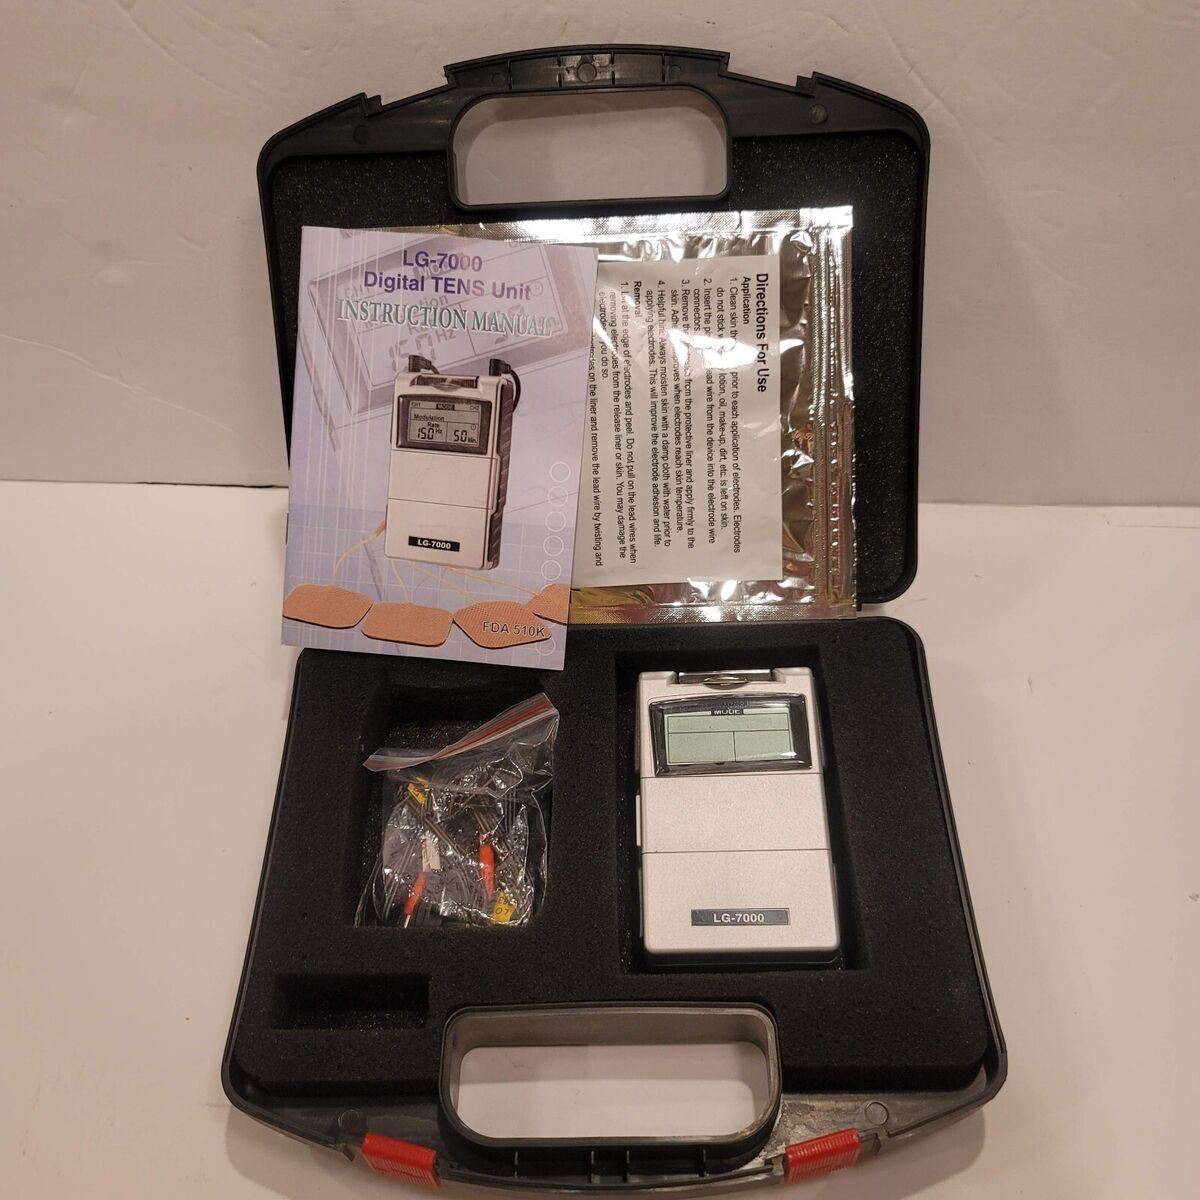 Tens 7000 Digital Tens Unit with Accessories